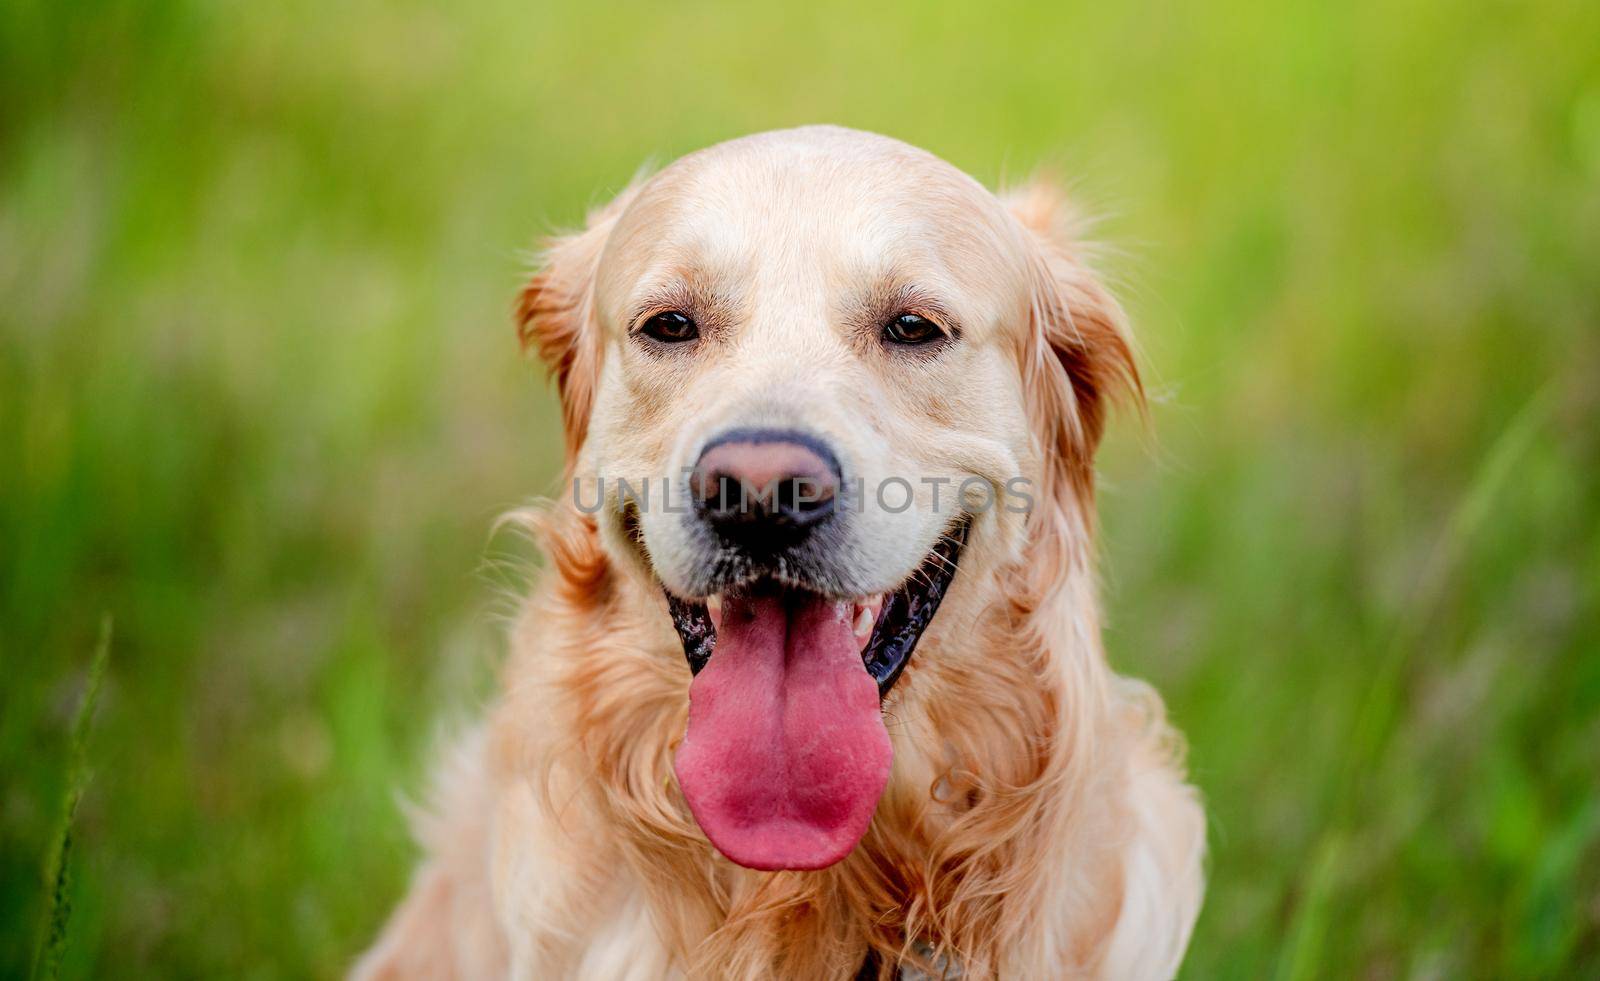 Golden retriever dog looking at the camera during summer walk outdoors. Cute doggy pet labrador sitting in green grass with tonque out